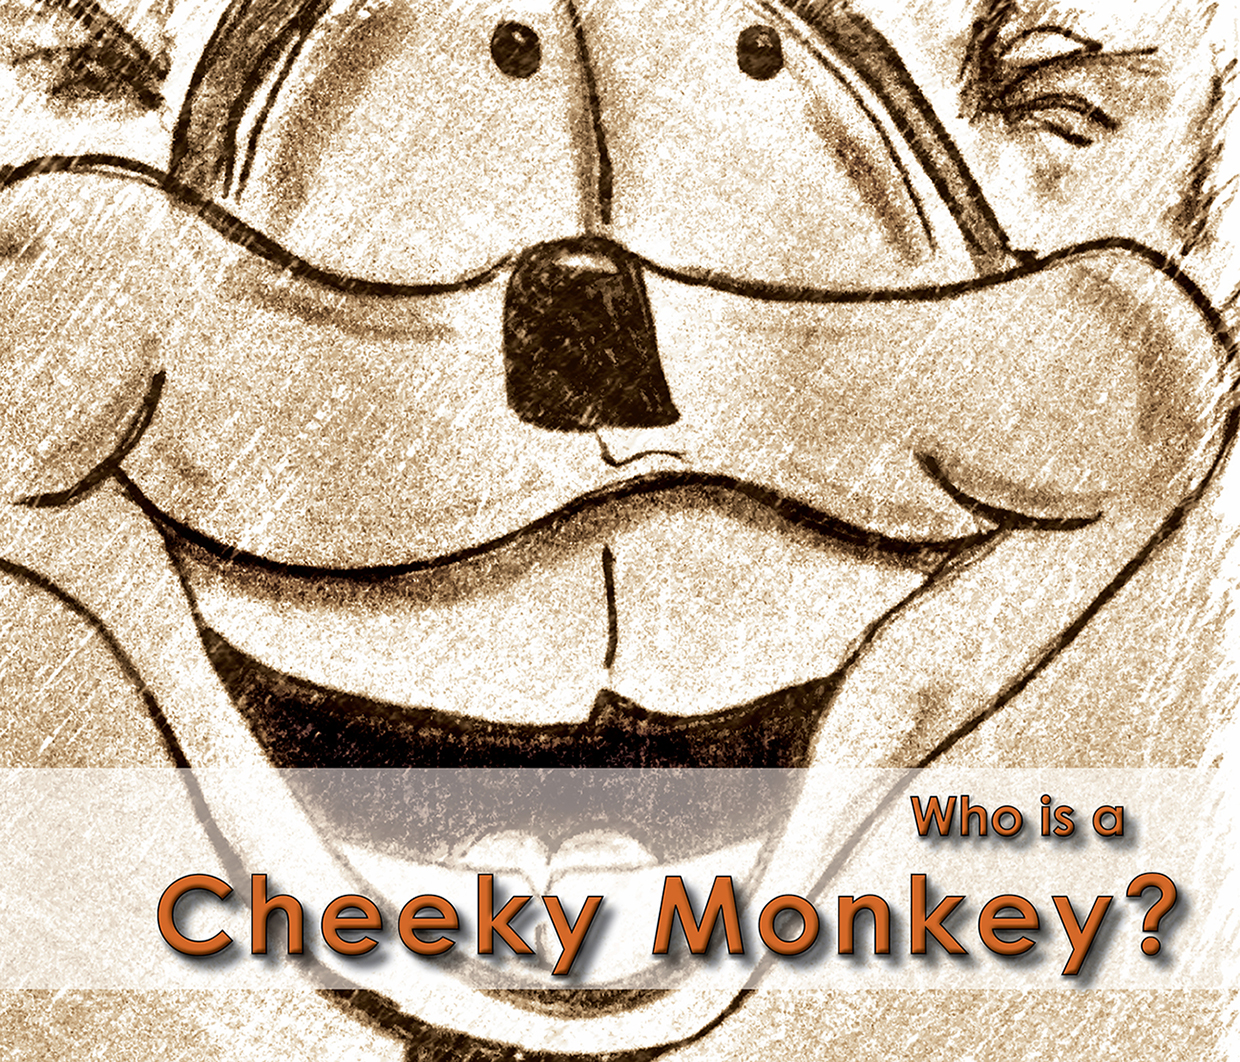 Who is a Cheeky Monkey?